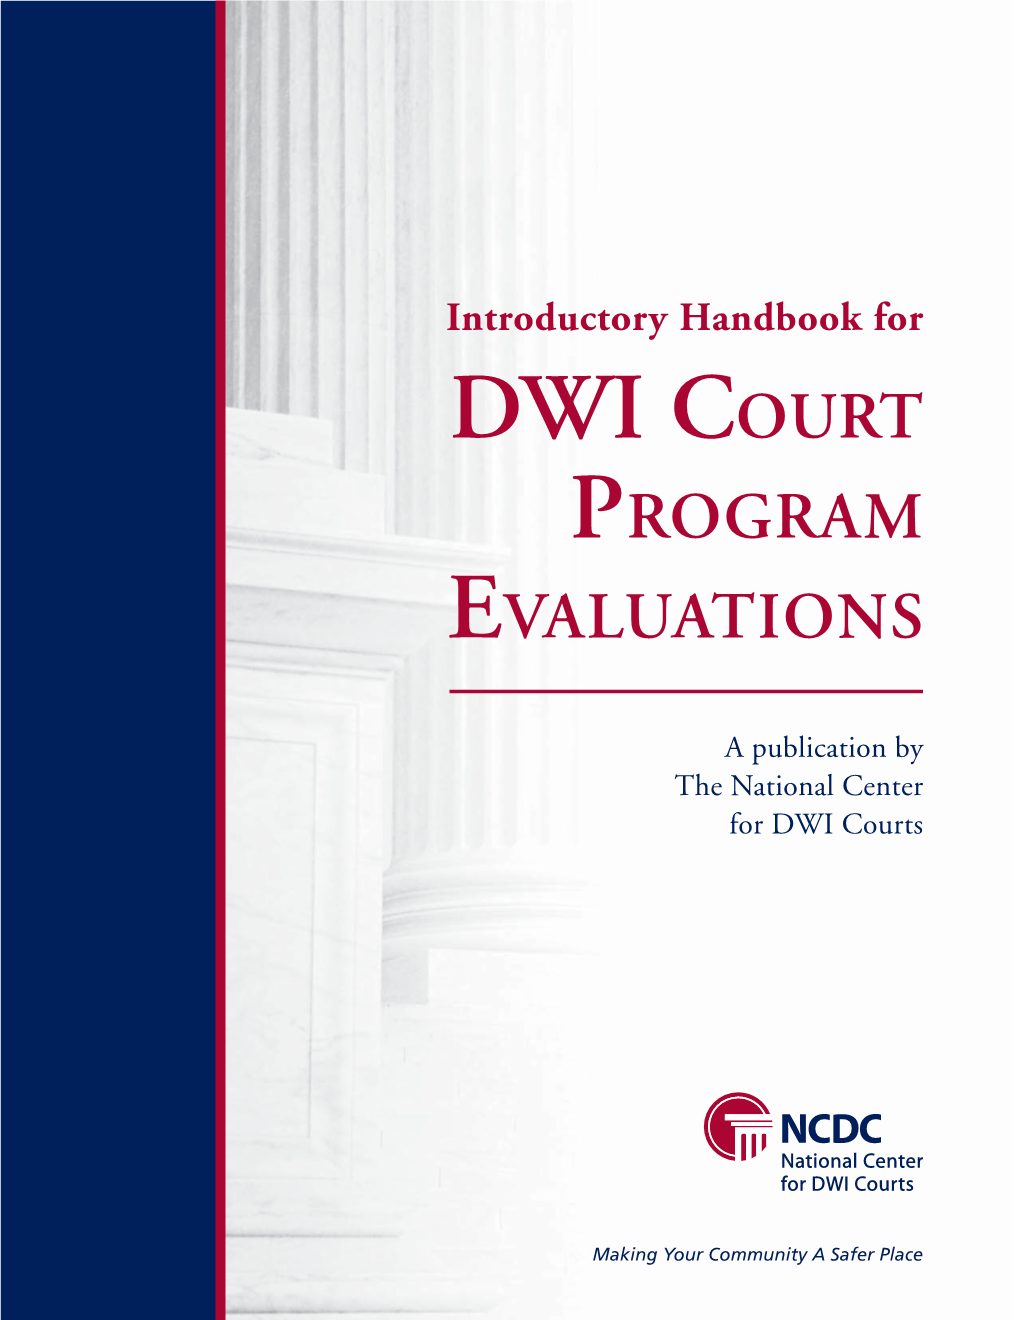 Introductory Handbook for DWI COURT PROGRAM EVALUATIONS